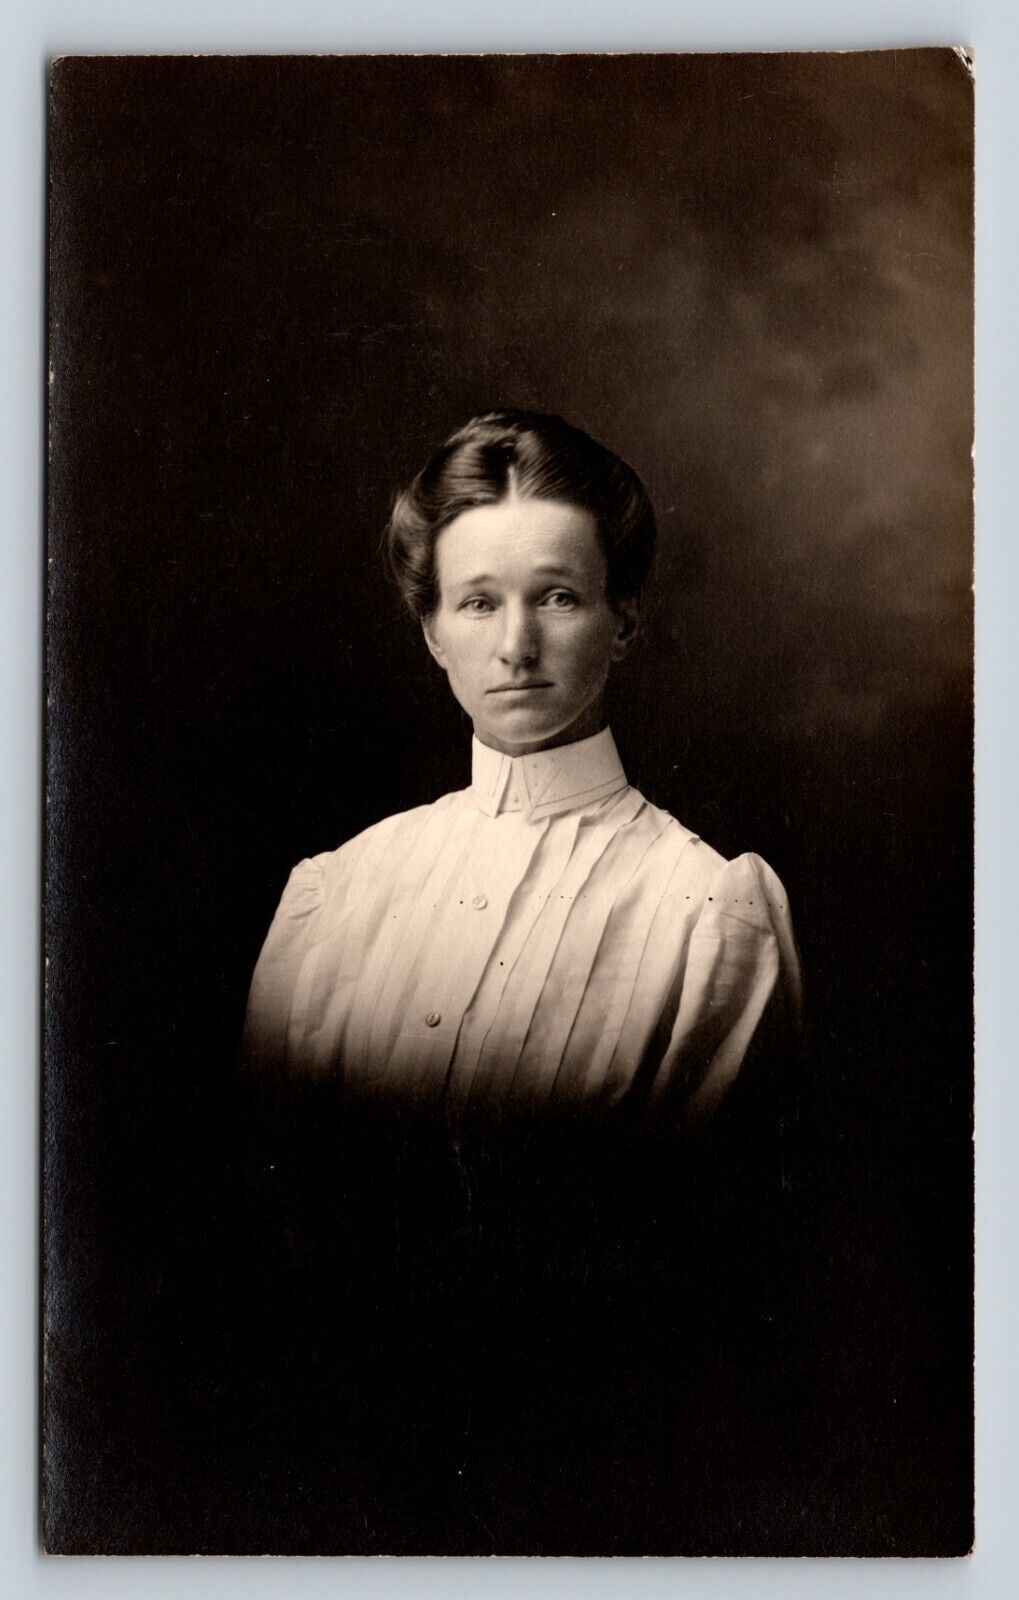 ANTIQUE RPPC Postcard Lady's Portrait, Dressed Up Nicely AZO 1904-1918